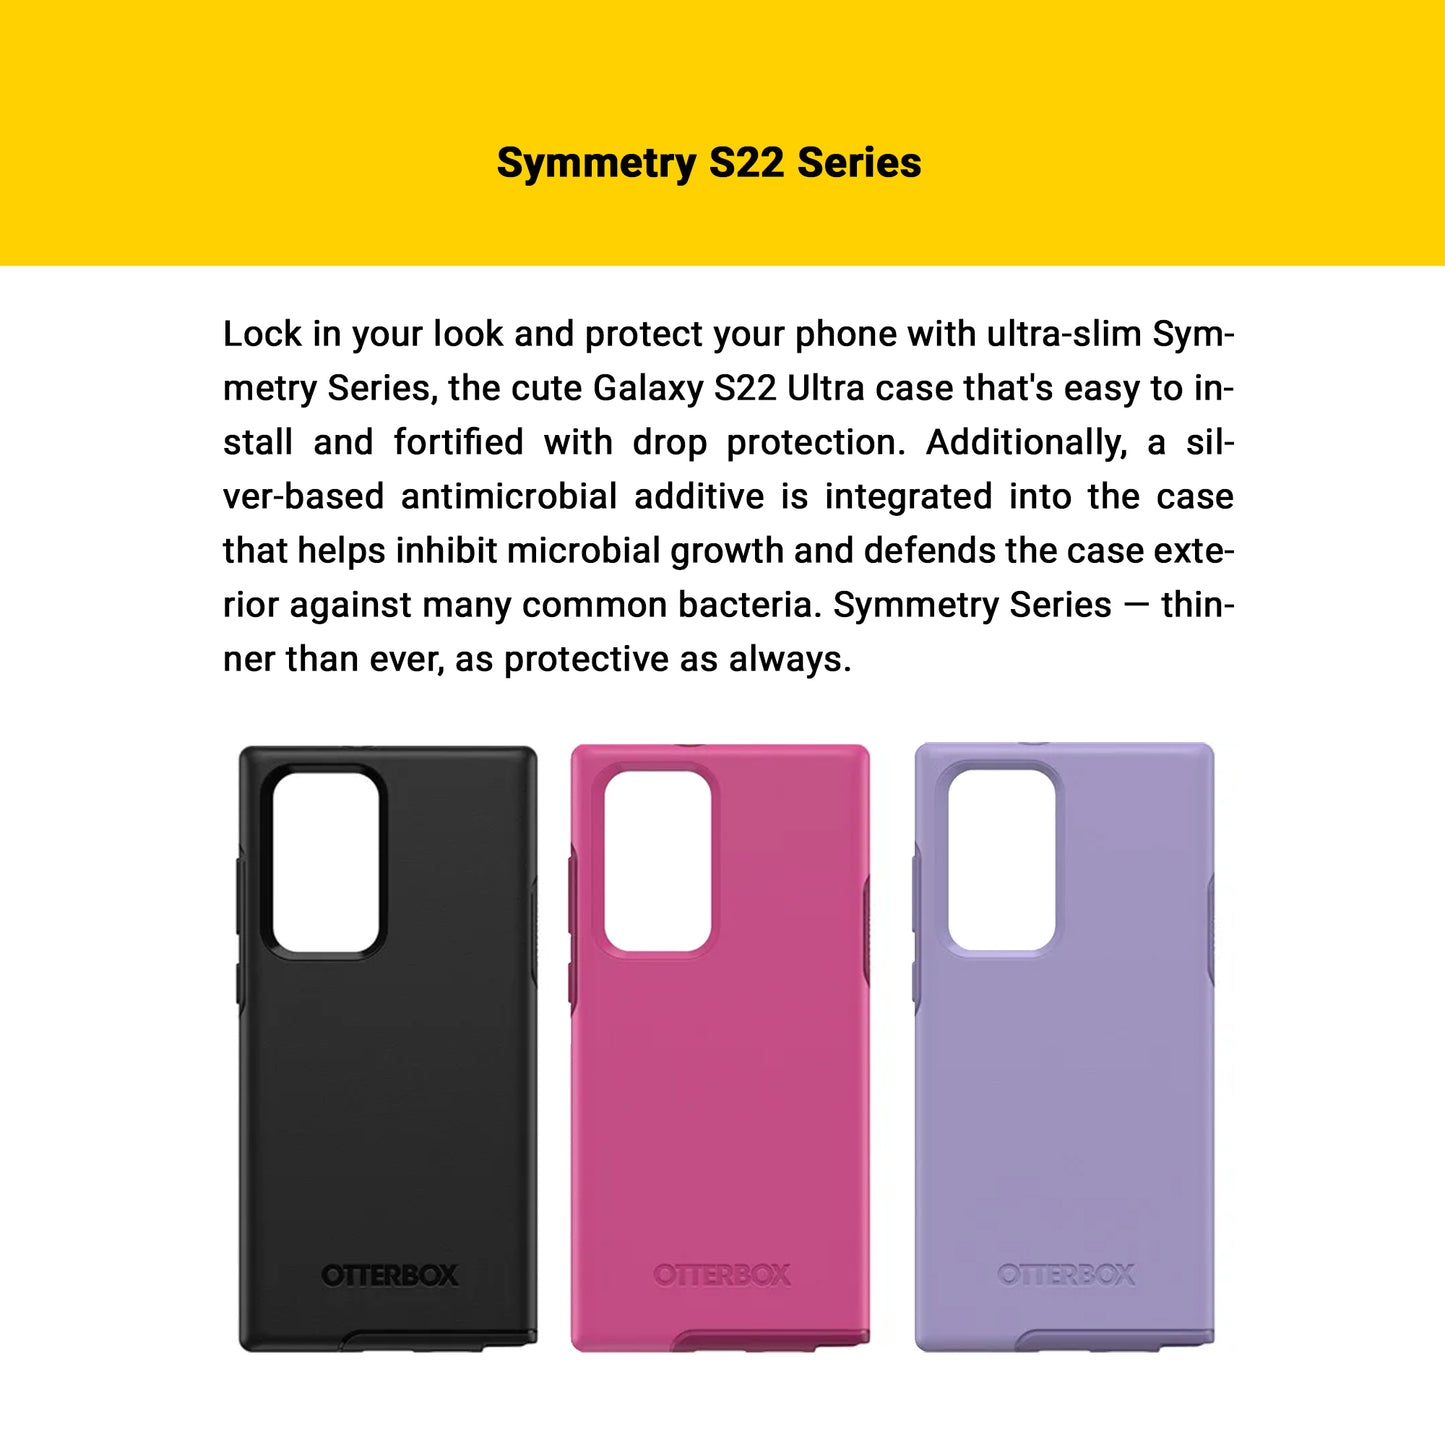 Otterbox Symmetry Series Case for Samsung Galaxy S22 Ultra - Black (Barcode: 840104295960 )